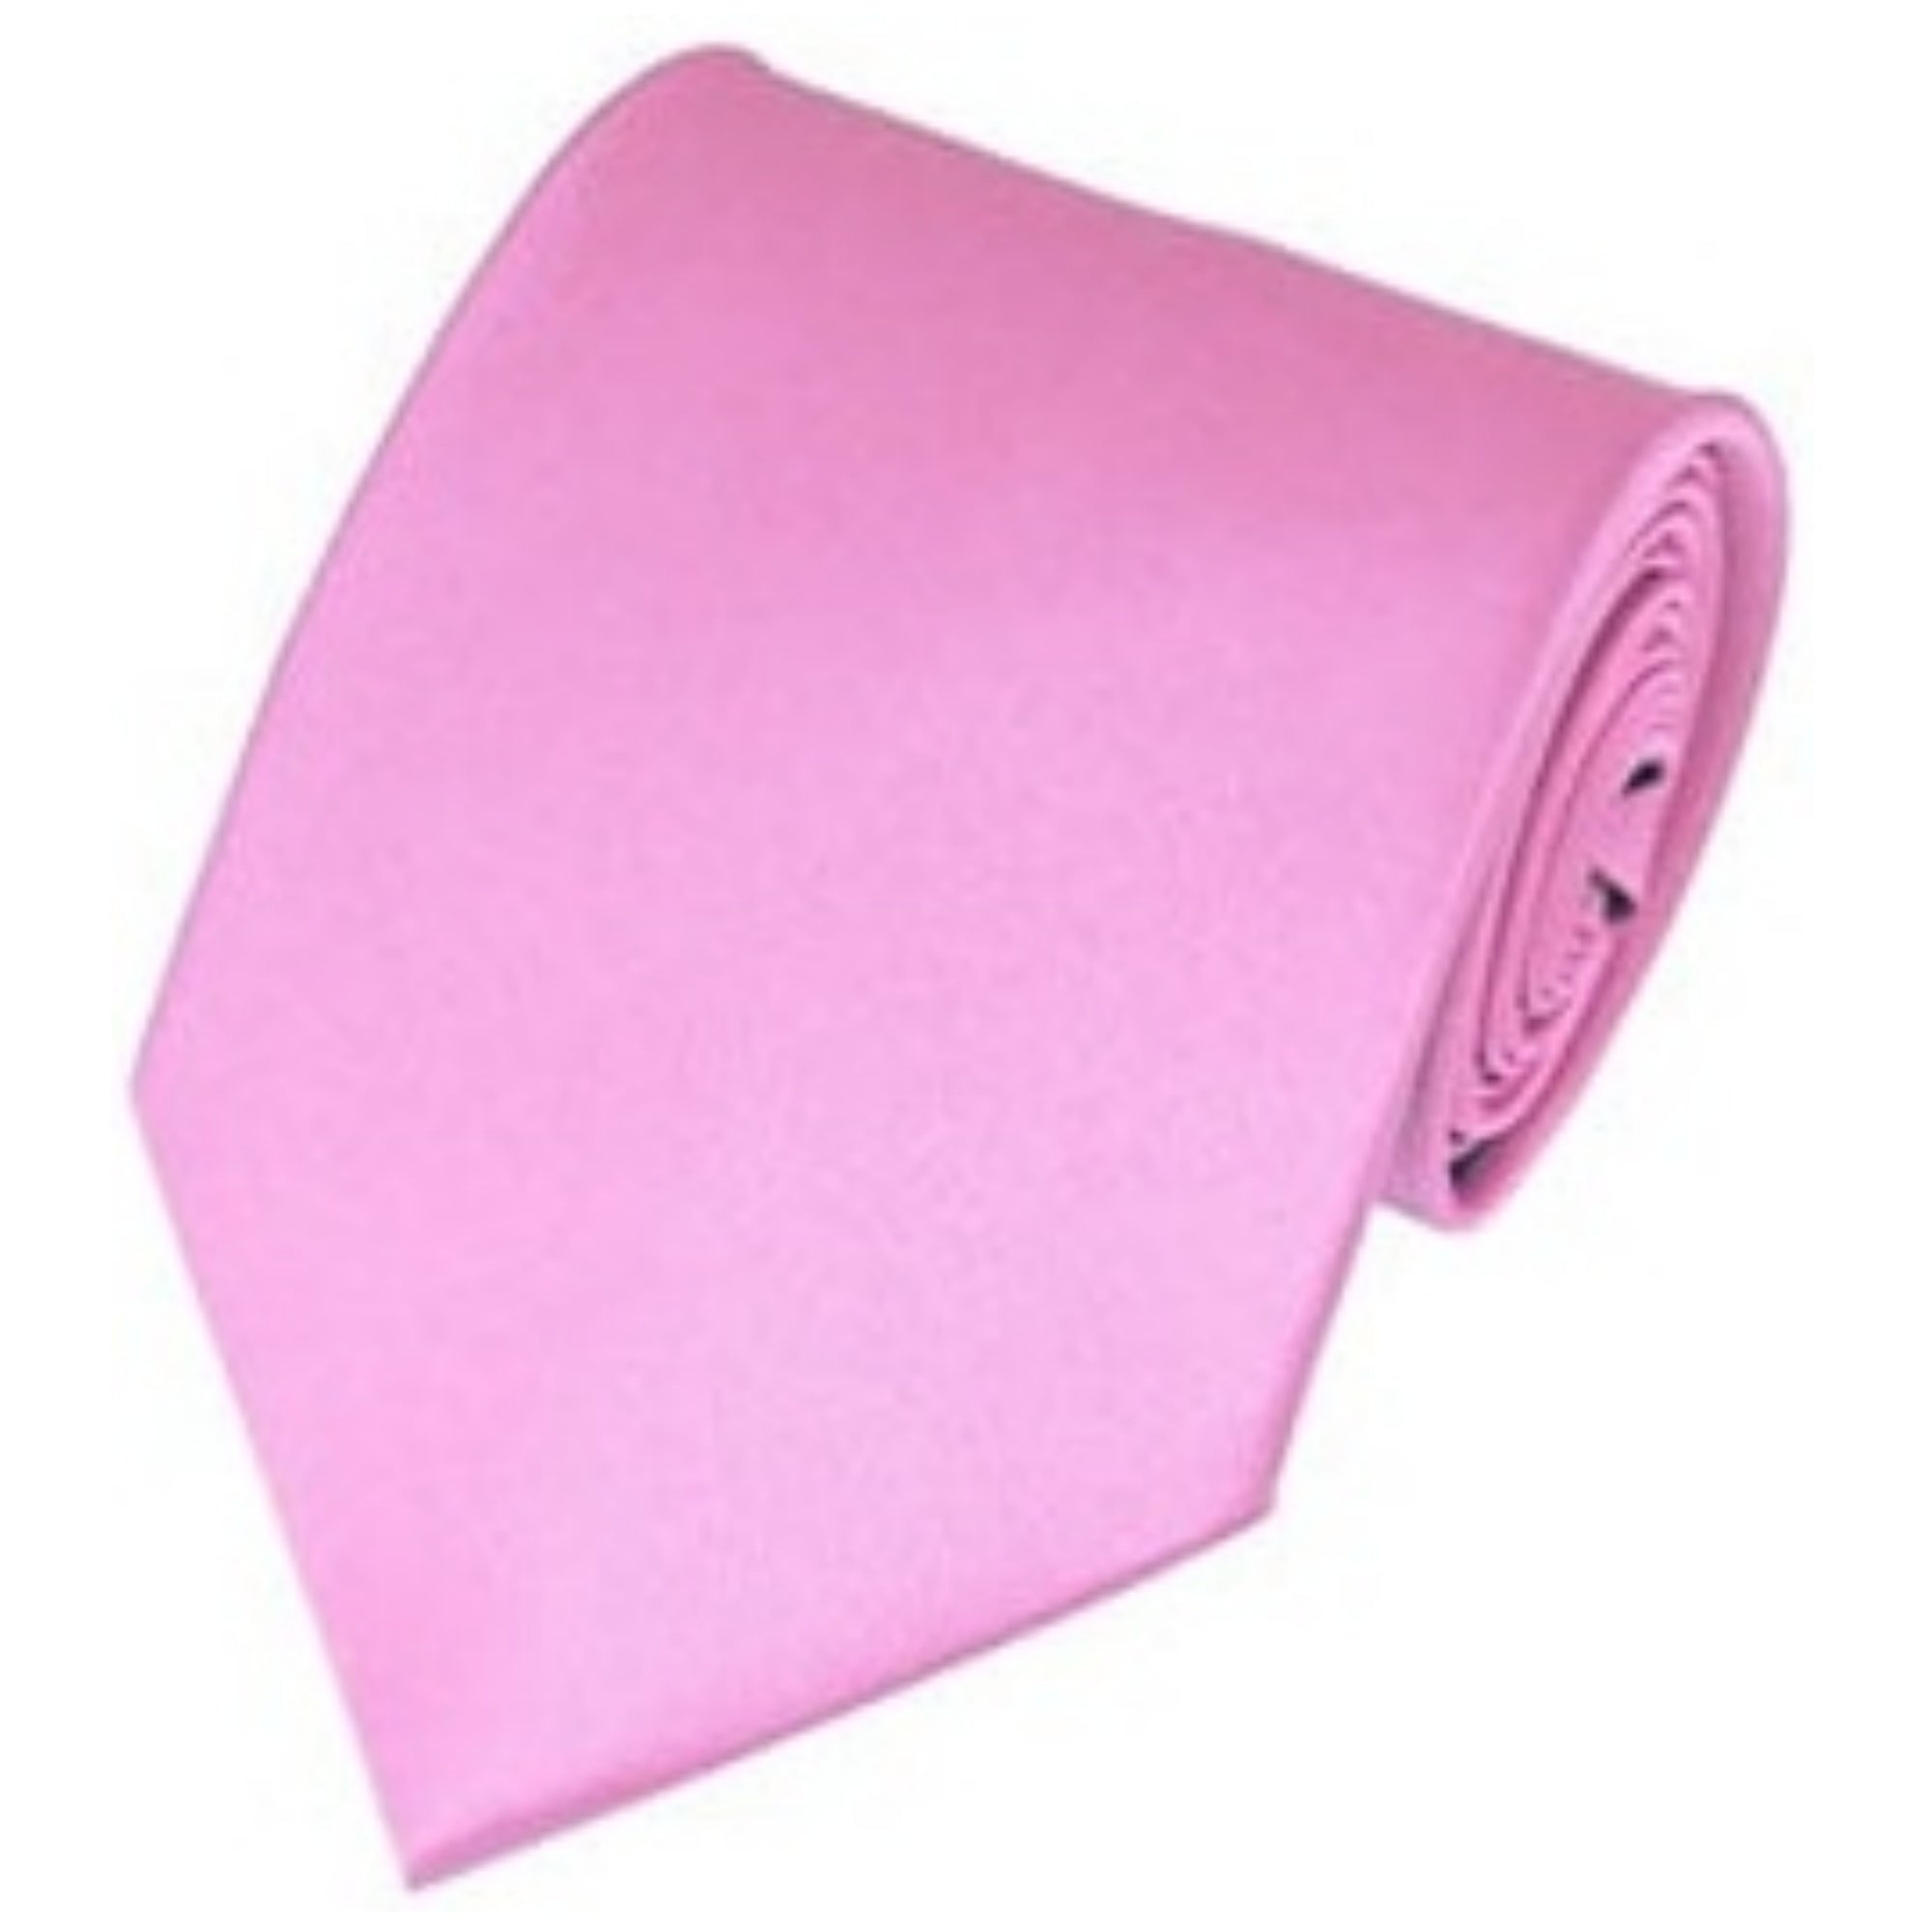 TheDapperTie Solid Color 3.5 Inch Wide And 62 Inch Extra Long Necktie For Big & Tall Men Neck Tie TheDapperTie Pink  